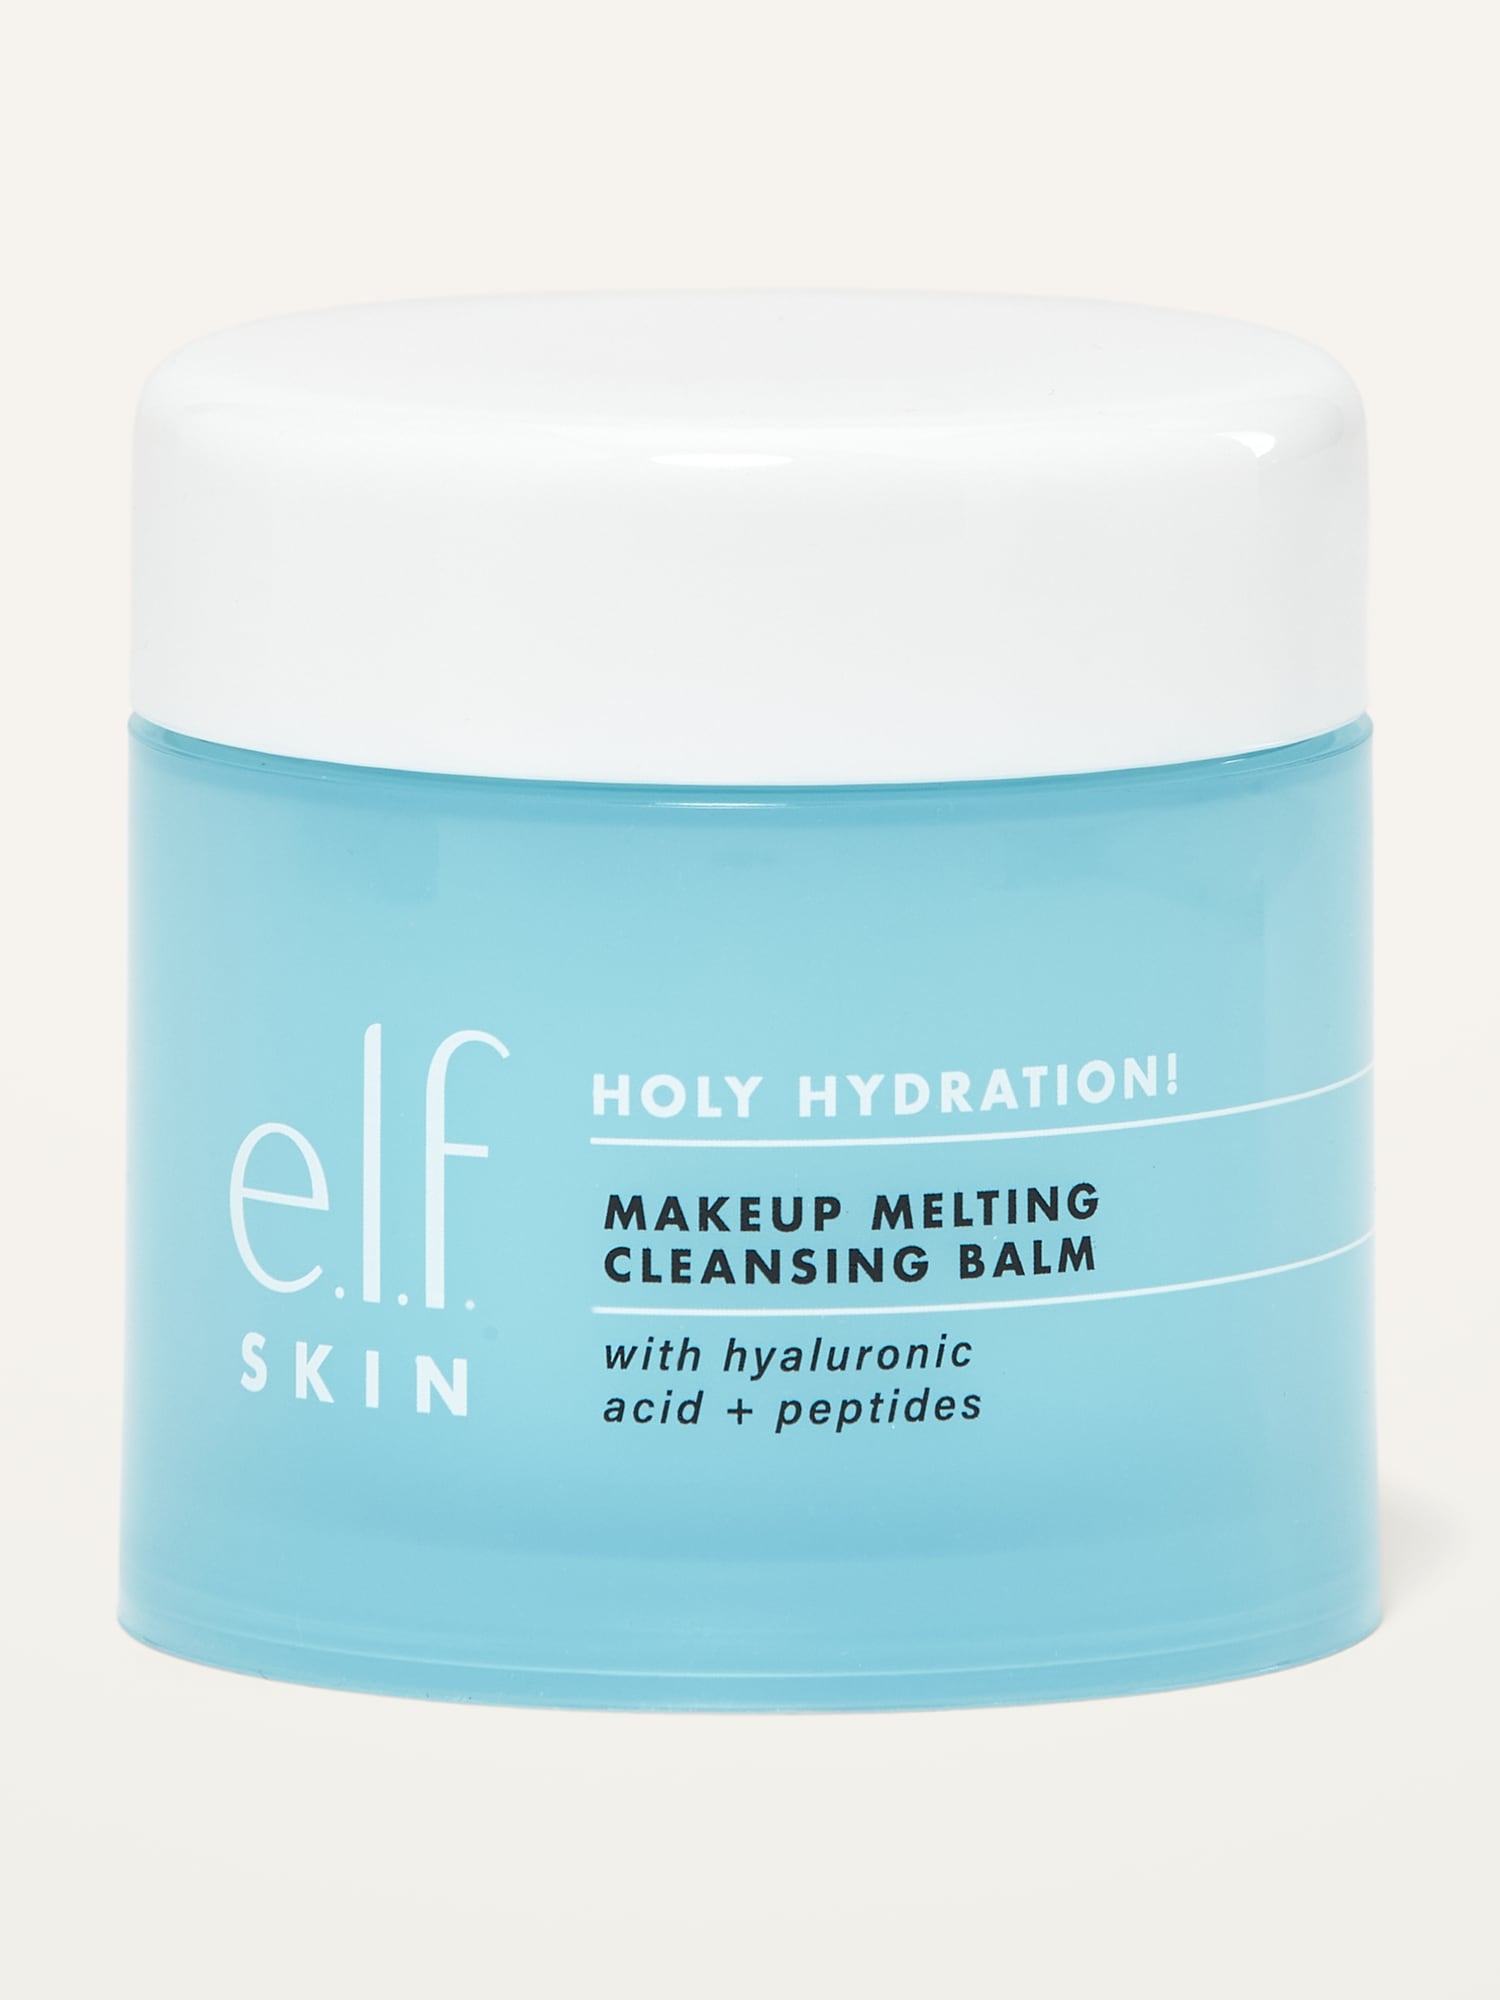 e.l.f. Holy Hydration! Makeup Melting Cleansing Balm | Old Navy